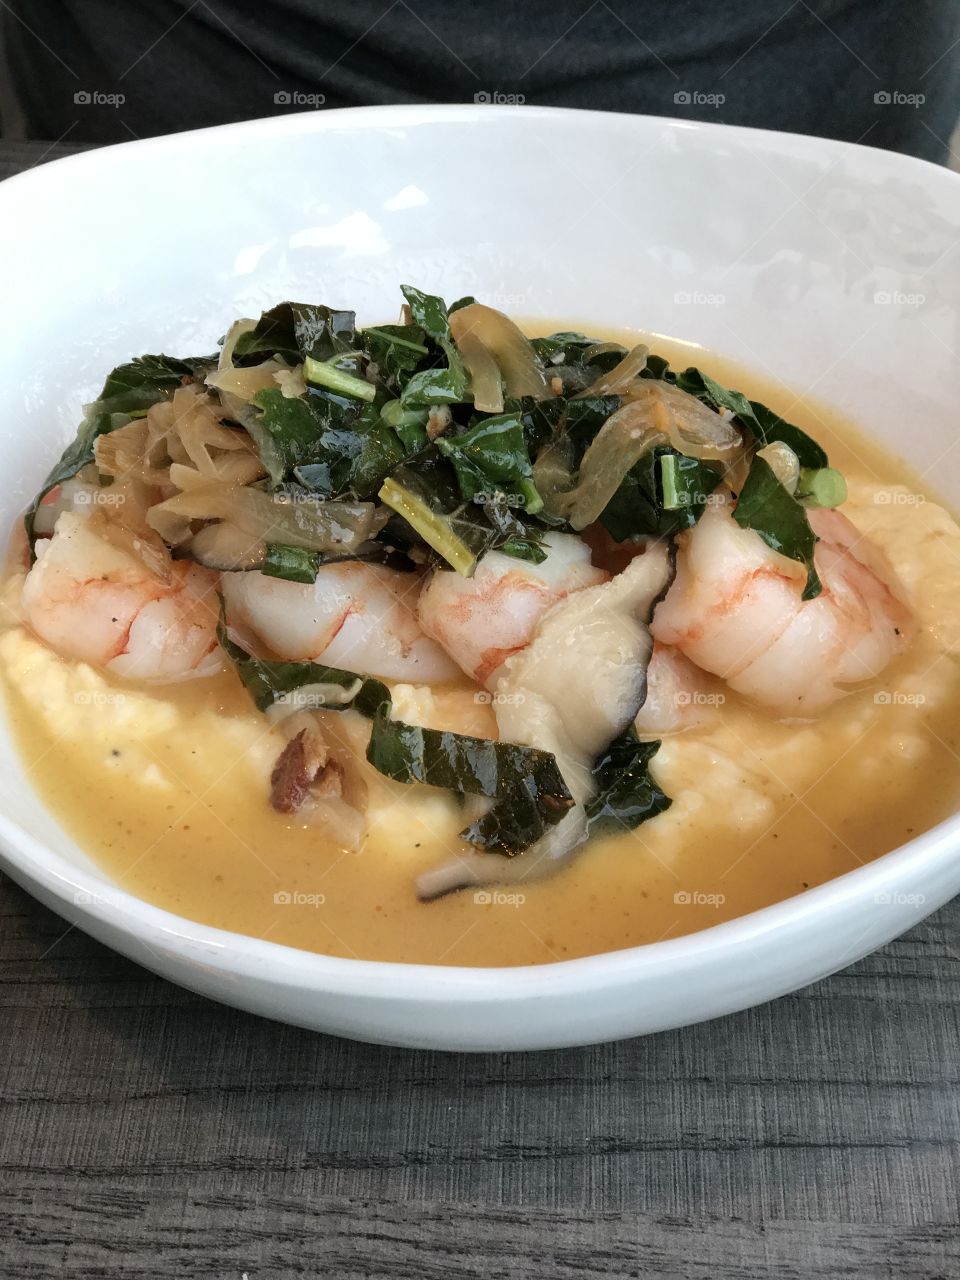 Jumbo Shrimp and grits served with fresh greens.